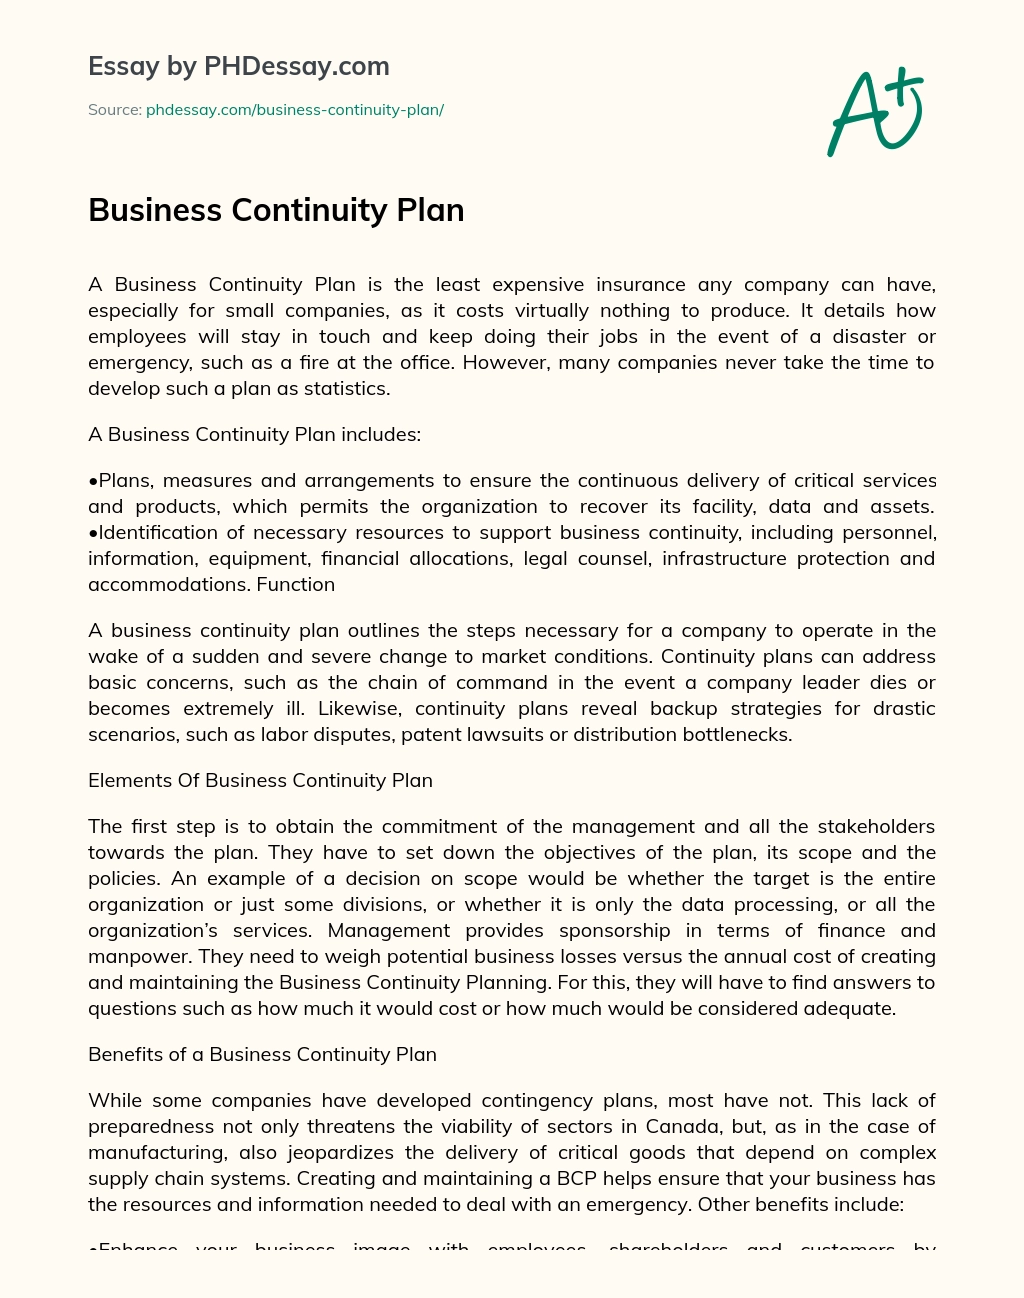 Business Continuity Plan essay